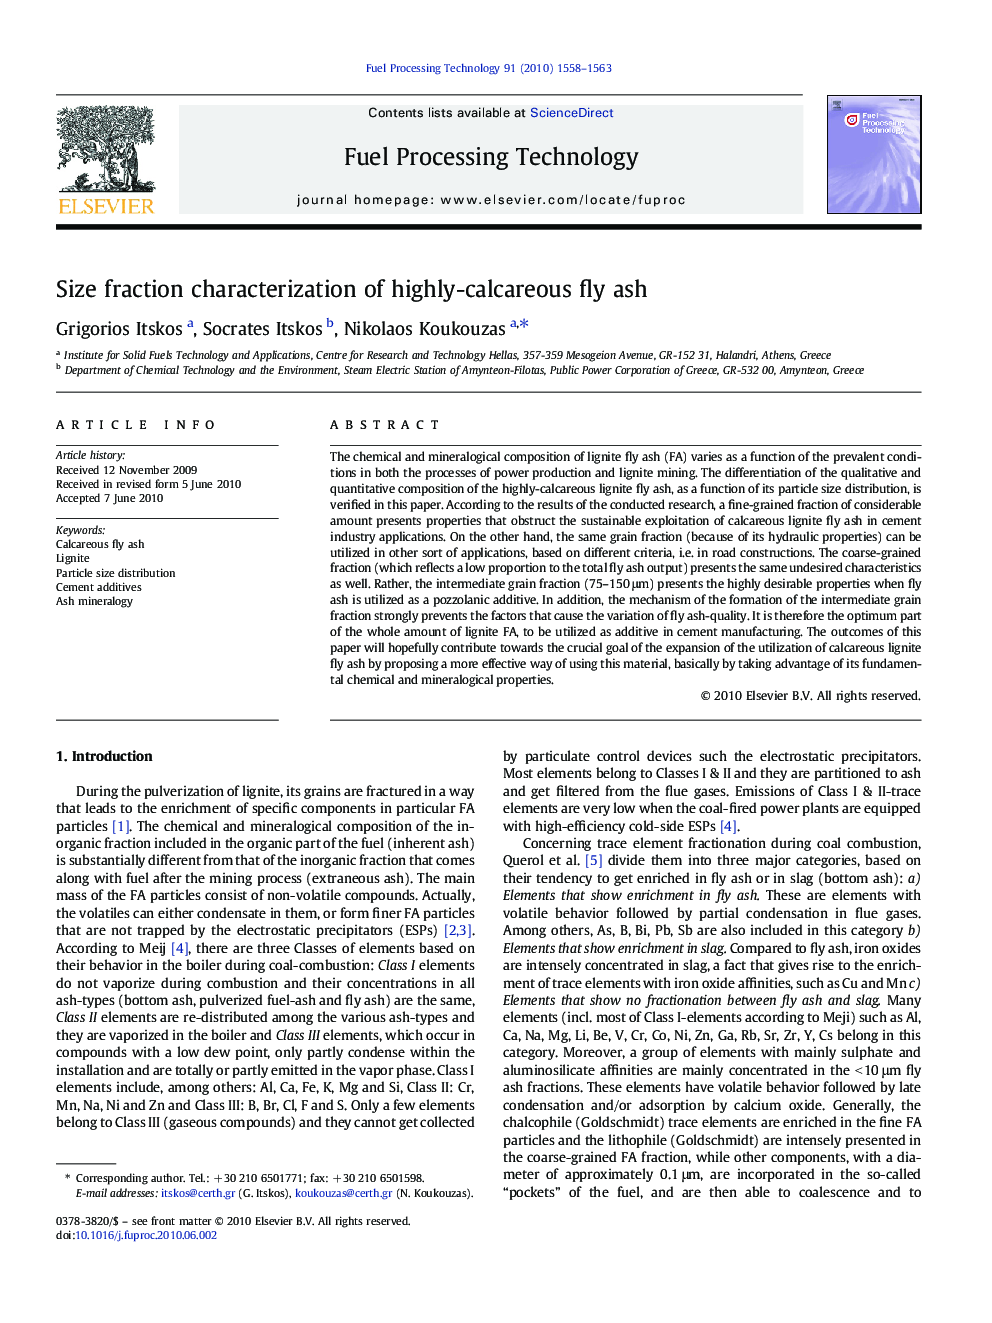 Size fraction characterization of highly-calcareous fly ash